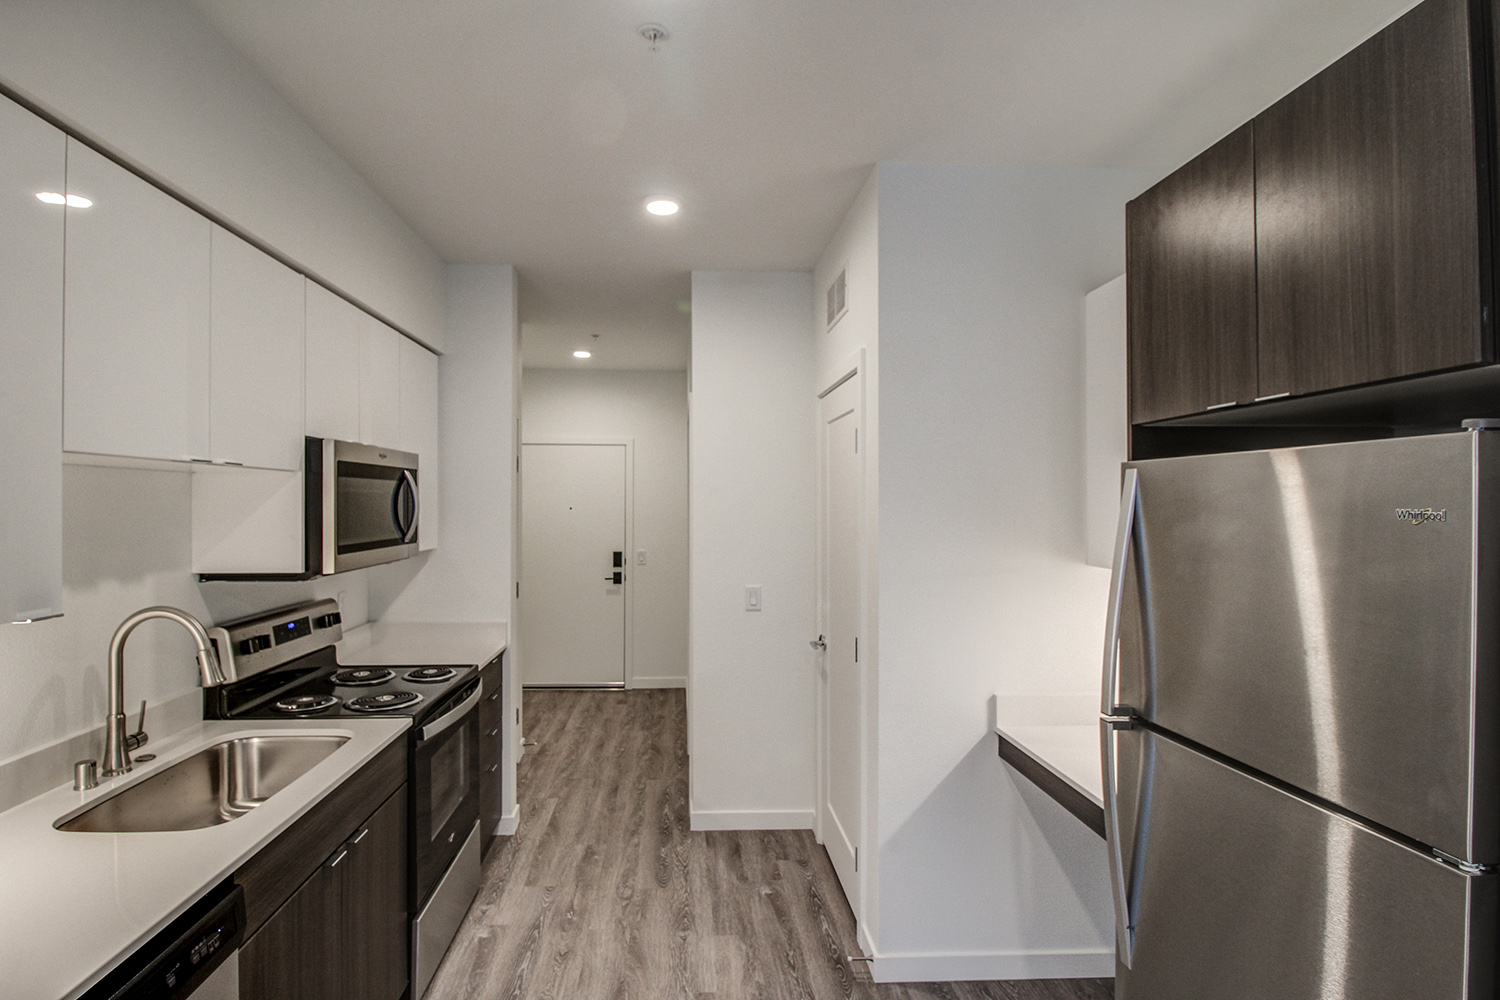 Kitchen area with stainless steel appliances at The Woods at Alderwood in Lynnwood, WA.